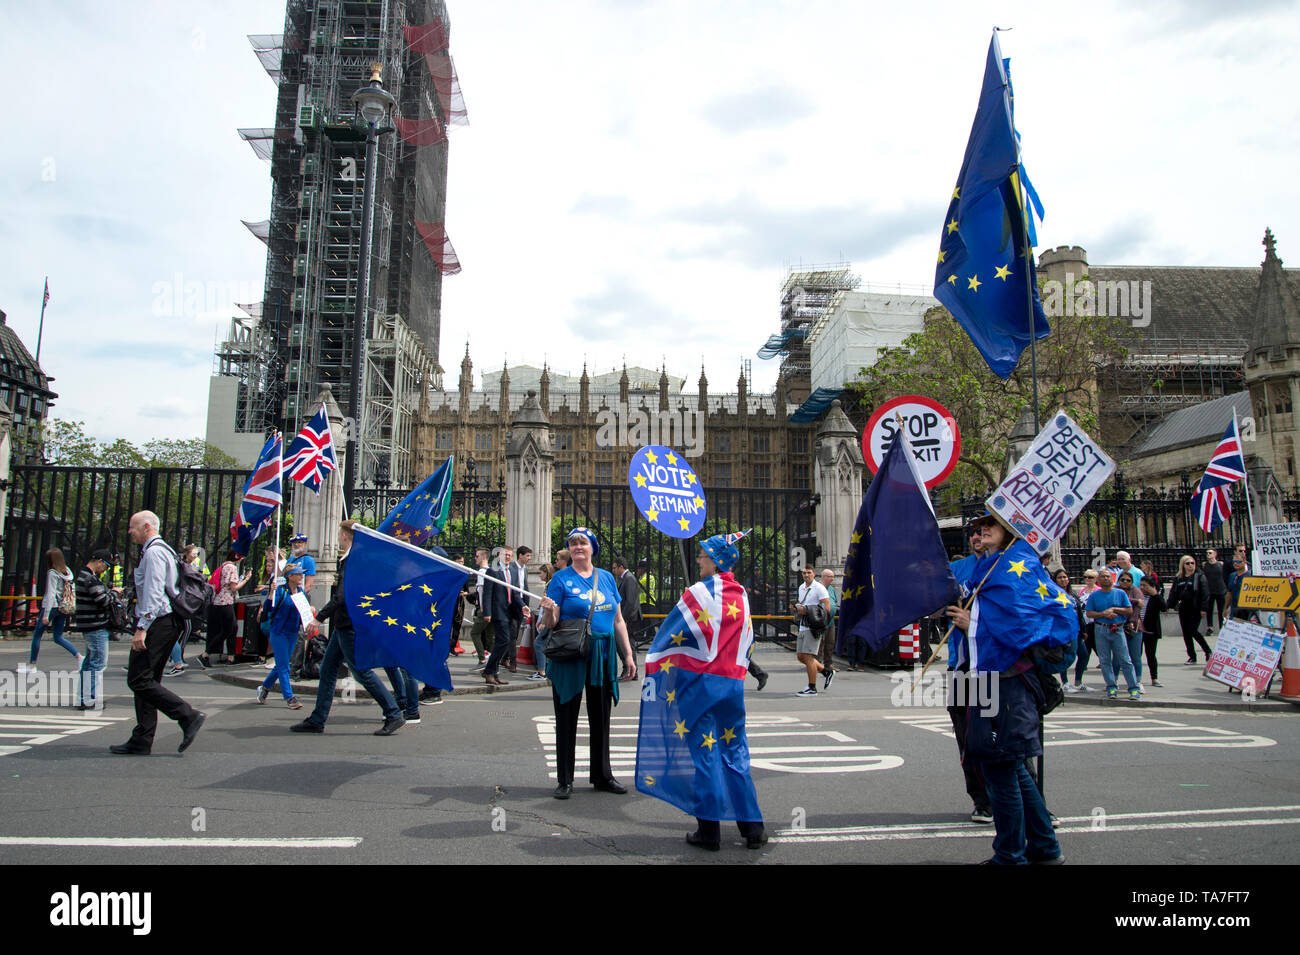 Westminster. Opposite Houses of Parliament May 22nd 2019. Protest to stop Brexit by Remainers. A group in front of the House of Commons. Stock Photo